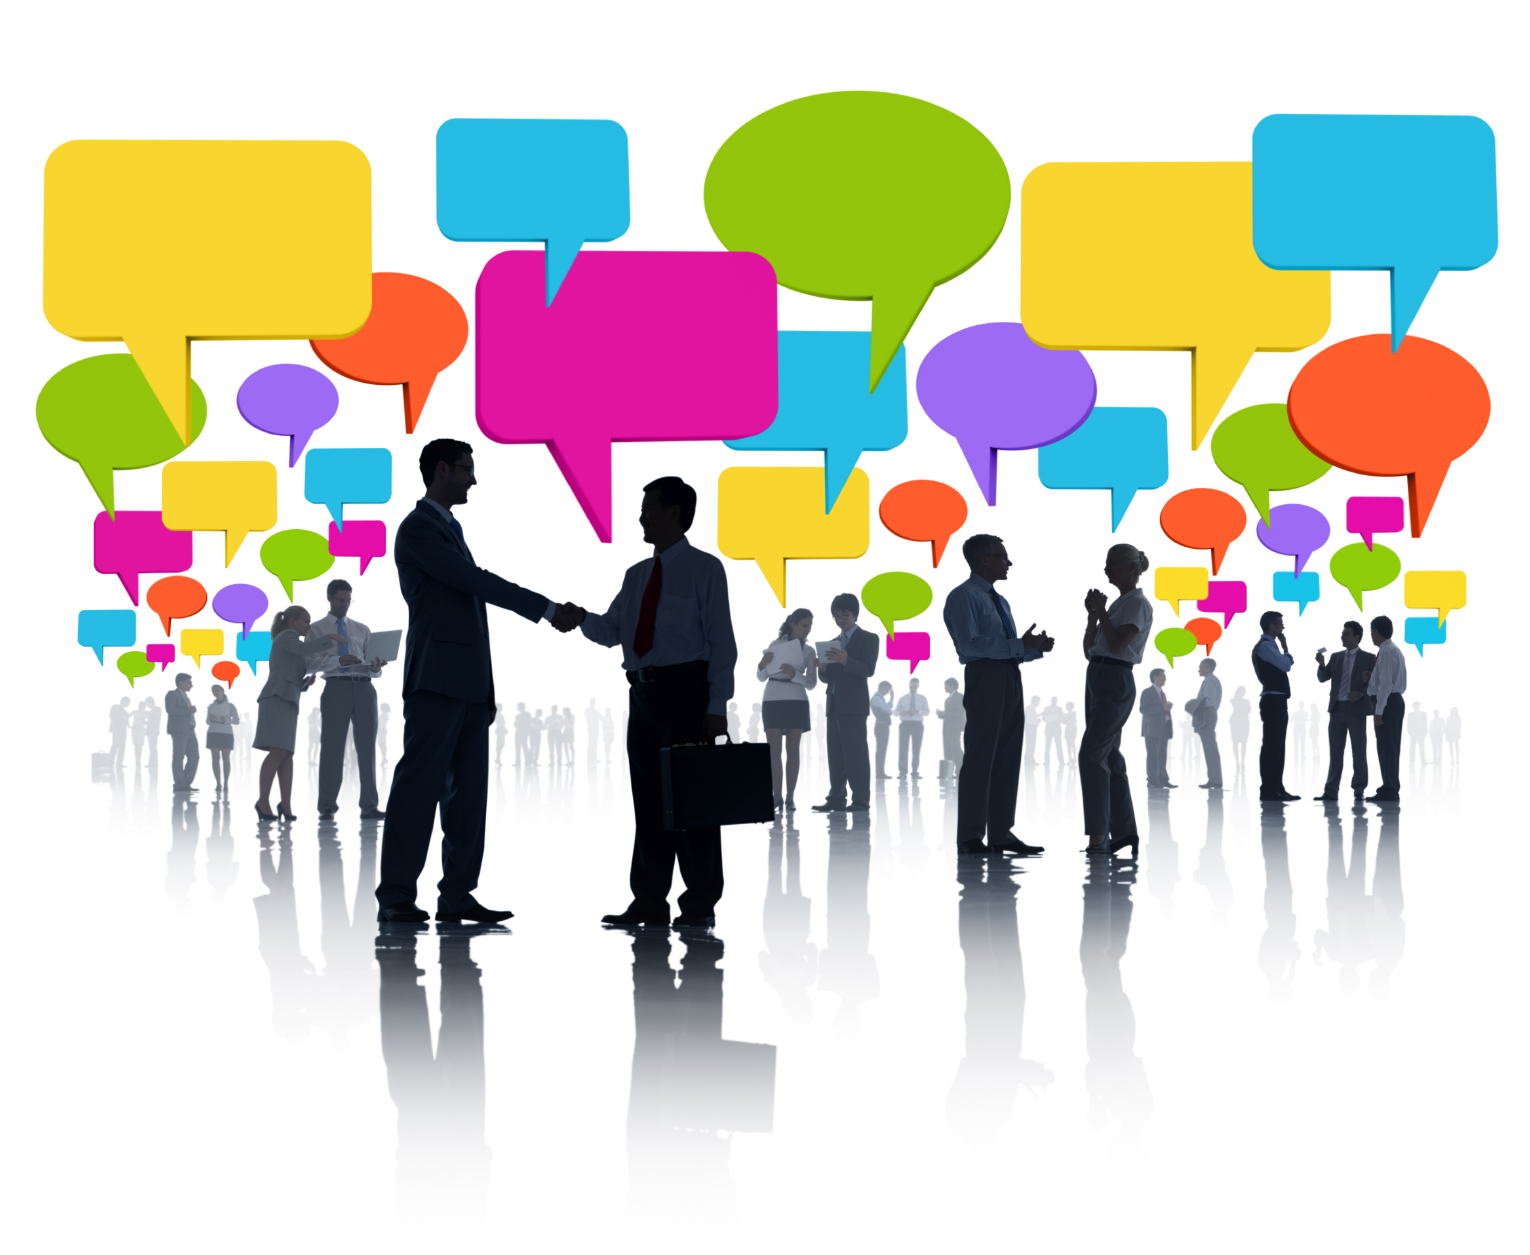 5 Ice Breaker Ideas to Get People Talking At Networking 